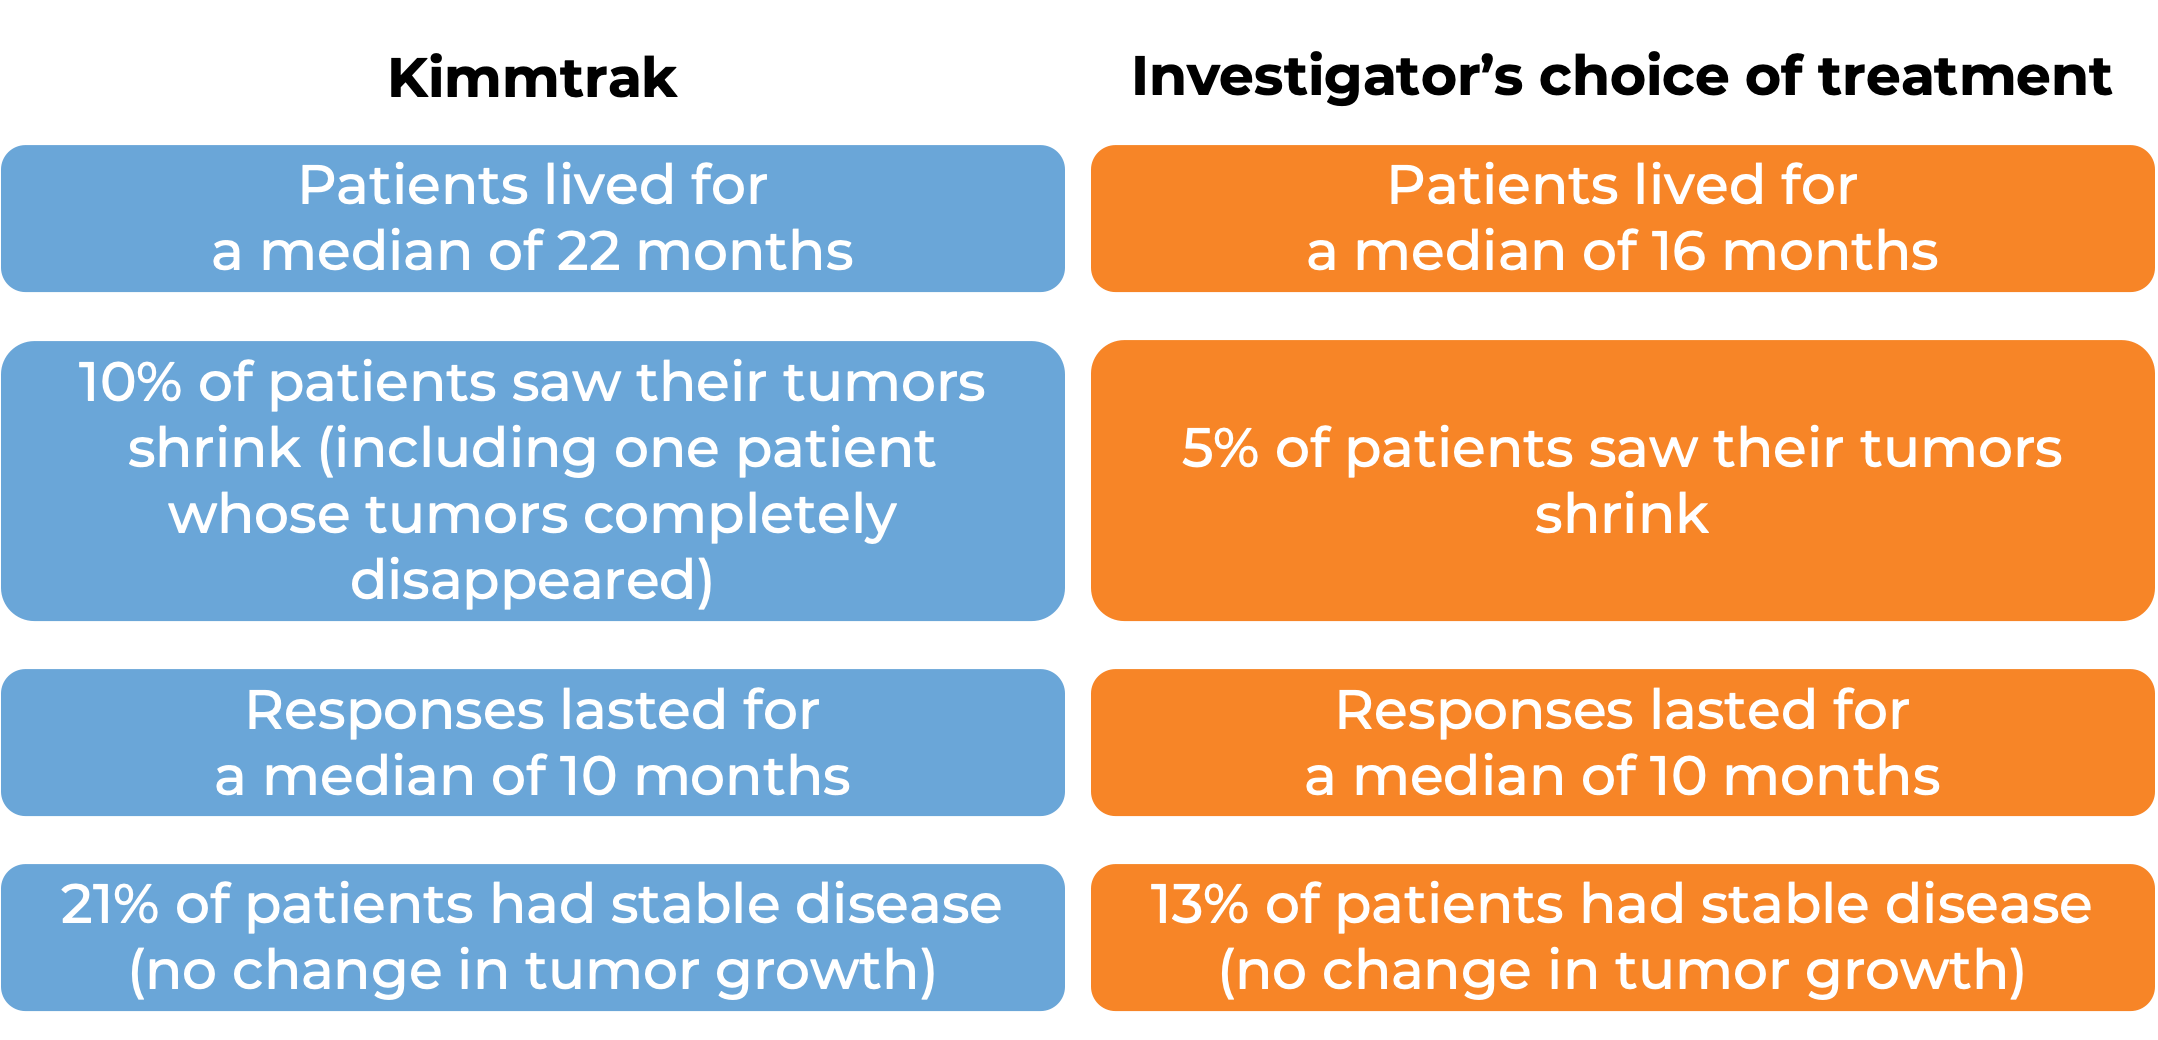 Results after treatment with Kimmtrak vs investigator's choice of treatment (diagram)